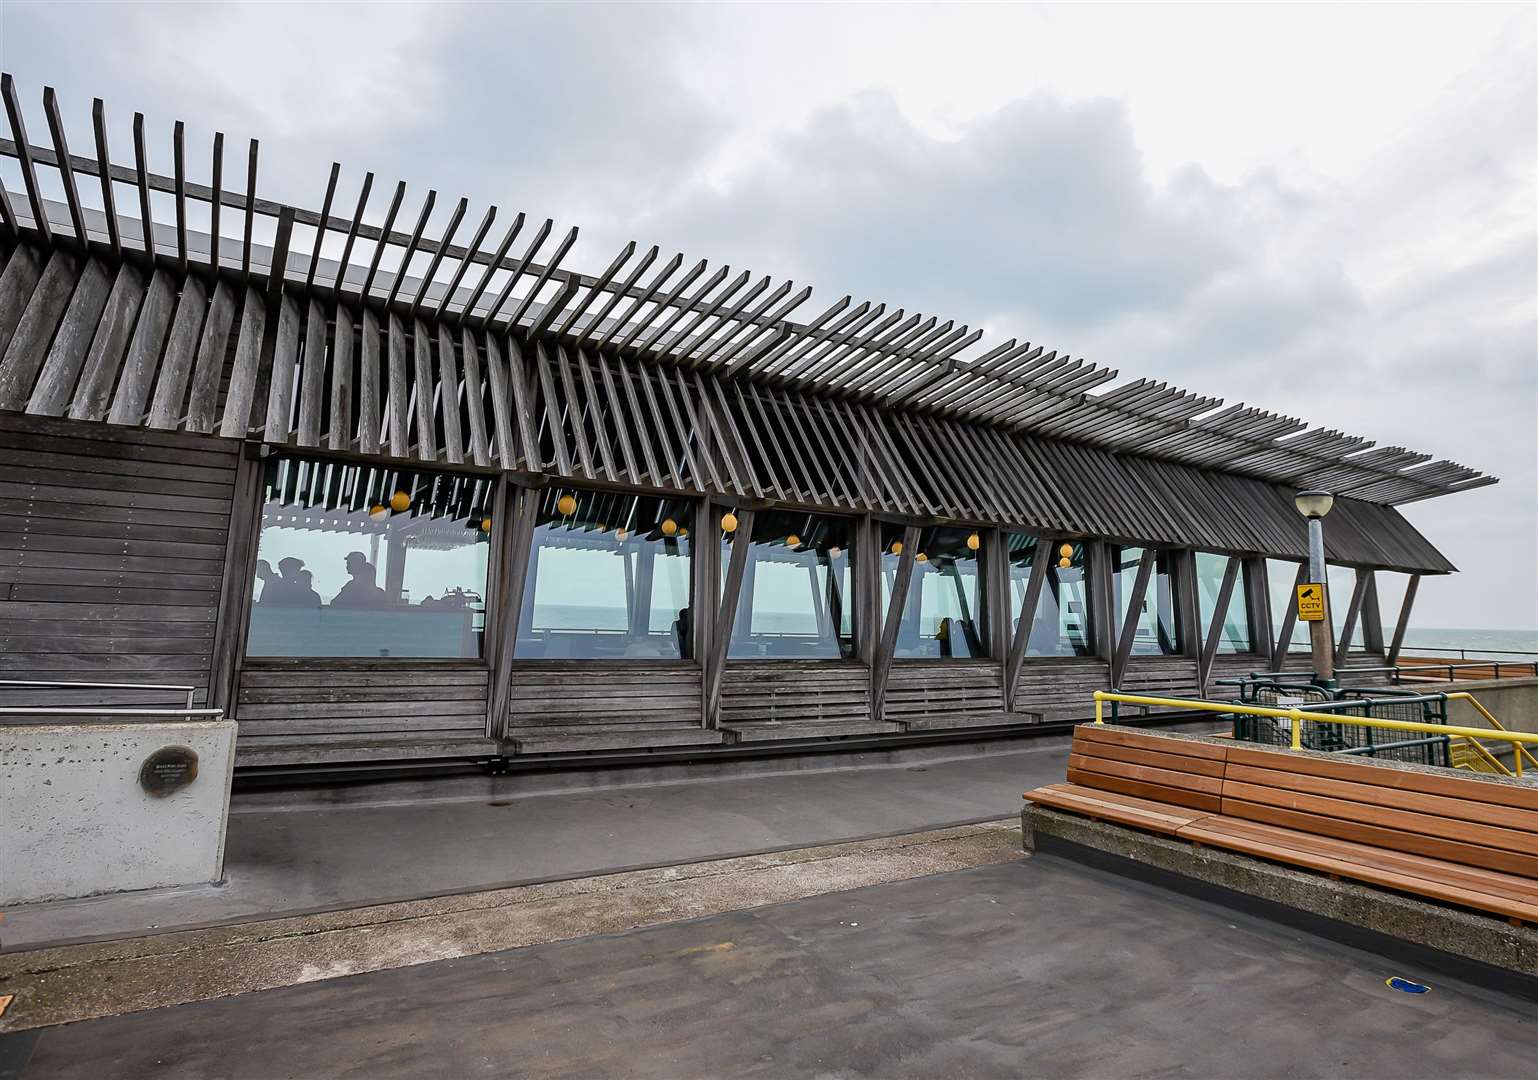 Deal Pier Kitchen pictured just before it opened in 2019